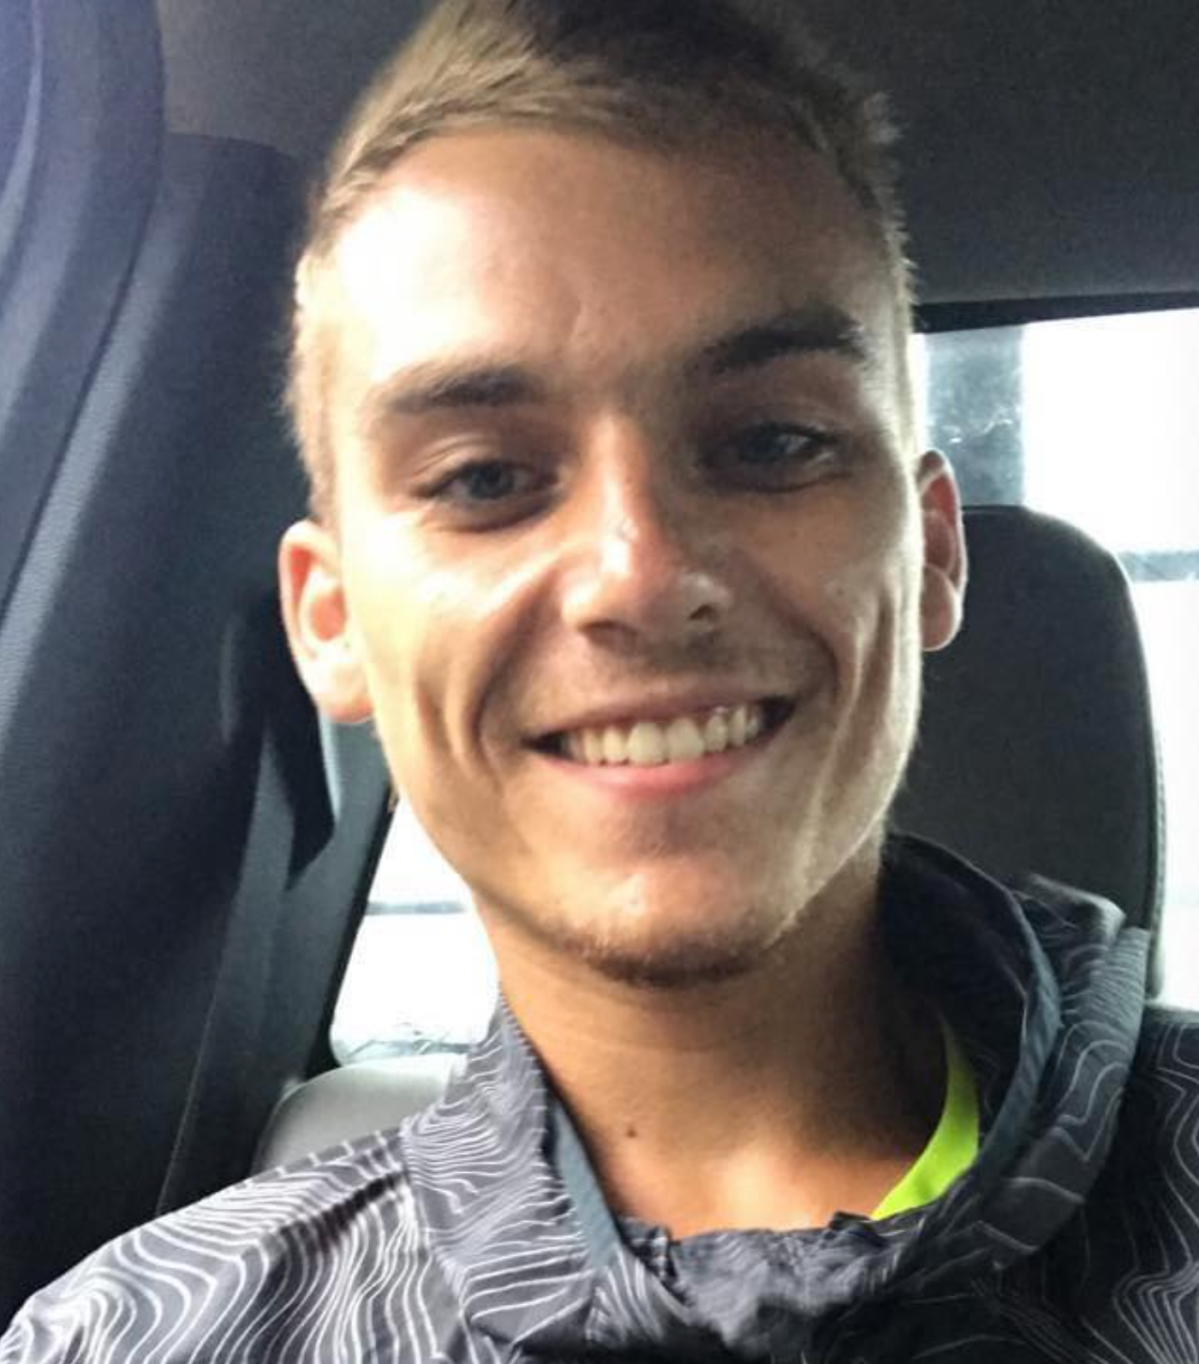 Northumberland OPP say a body found Sept. 18, 2022 in Alnwick-Halidmand Township was identified as missing person Travis Nickerson, 22, of Hastings, Ont.